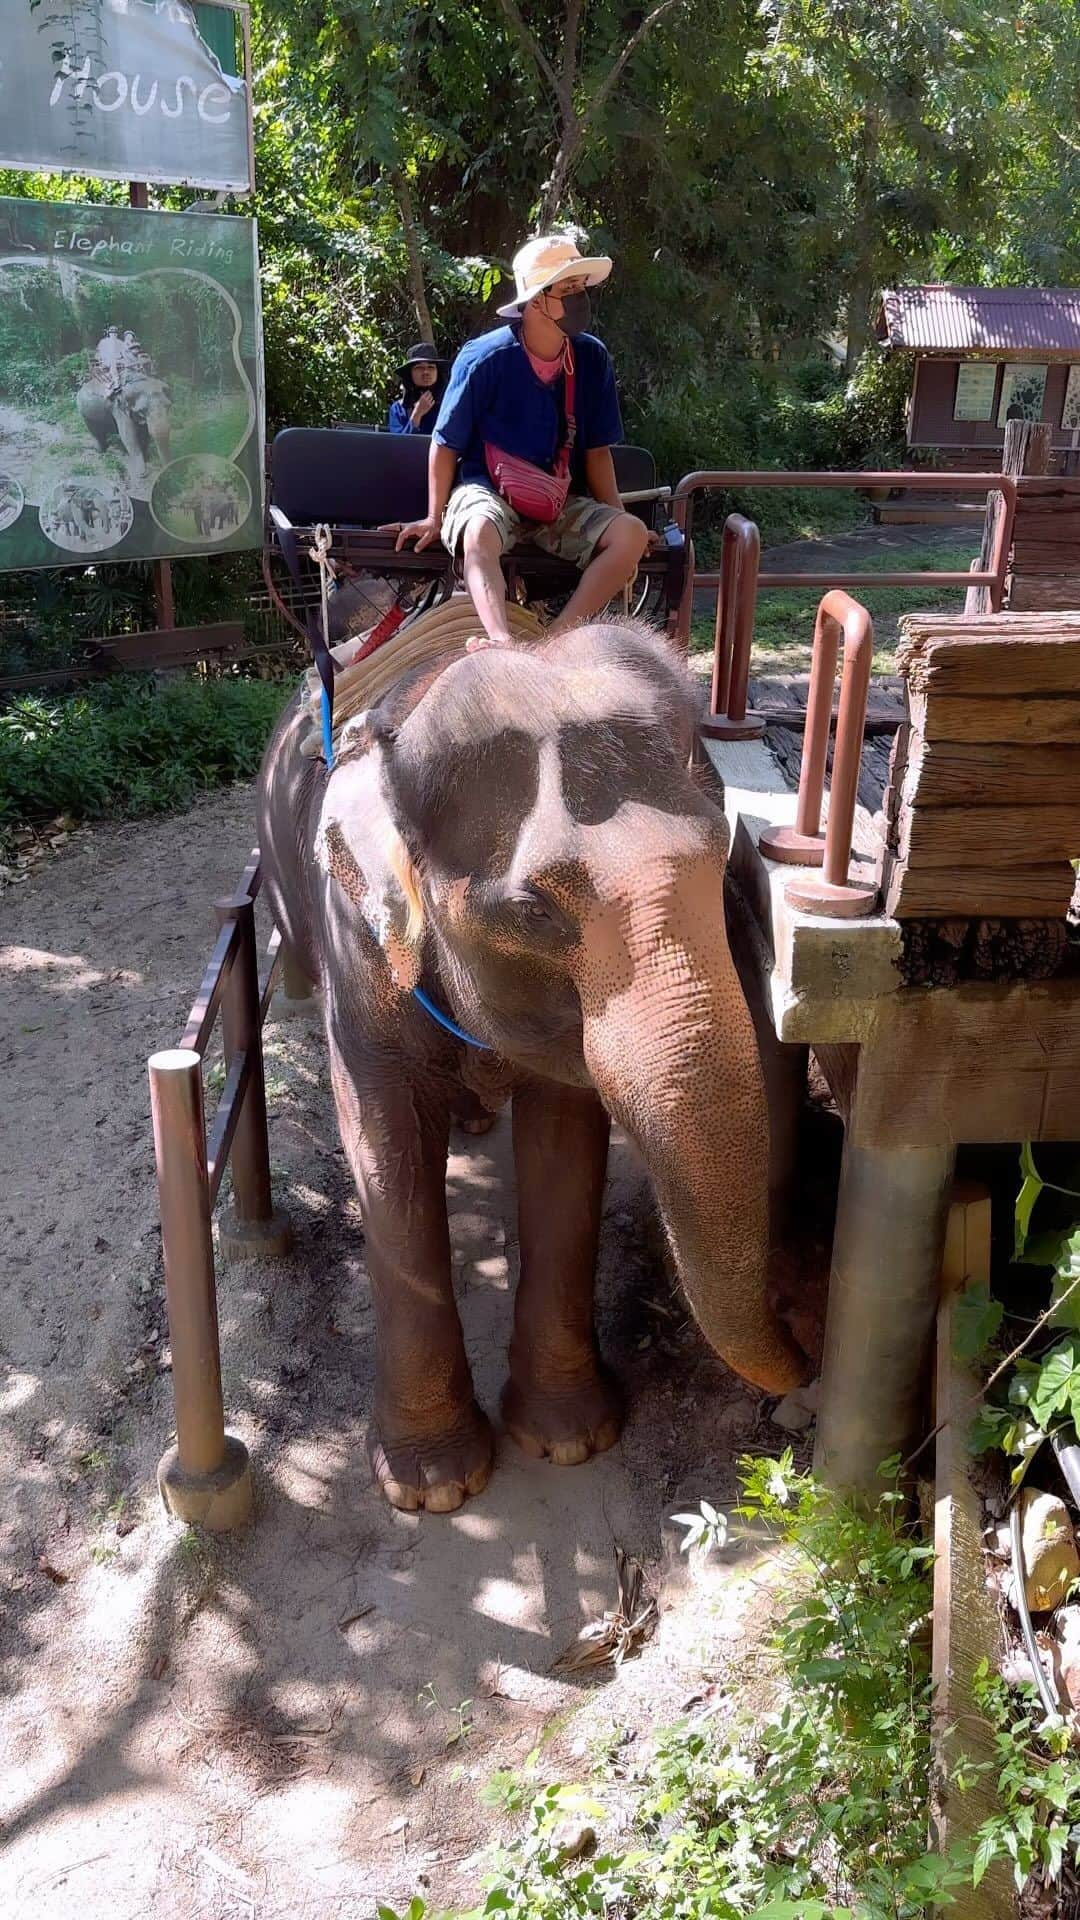 LIKIYAのインスタグラム：「⁡ I rode an elephant for the first time in my life🐘✨ ⁡ I was freaked out at first but he was really gentle that I got used to😌 ⁡ We had a great experience🙏✨ ⁡ Look at our scared face at the end😂lol ⁡ #thai #thailand #elephant  ⁡」